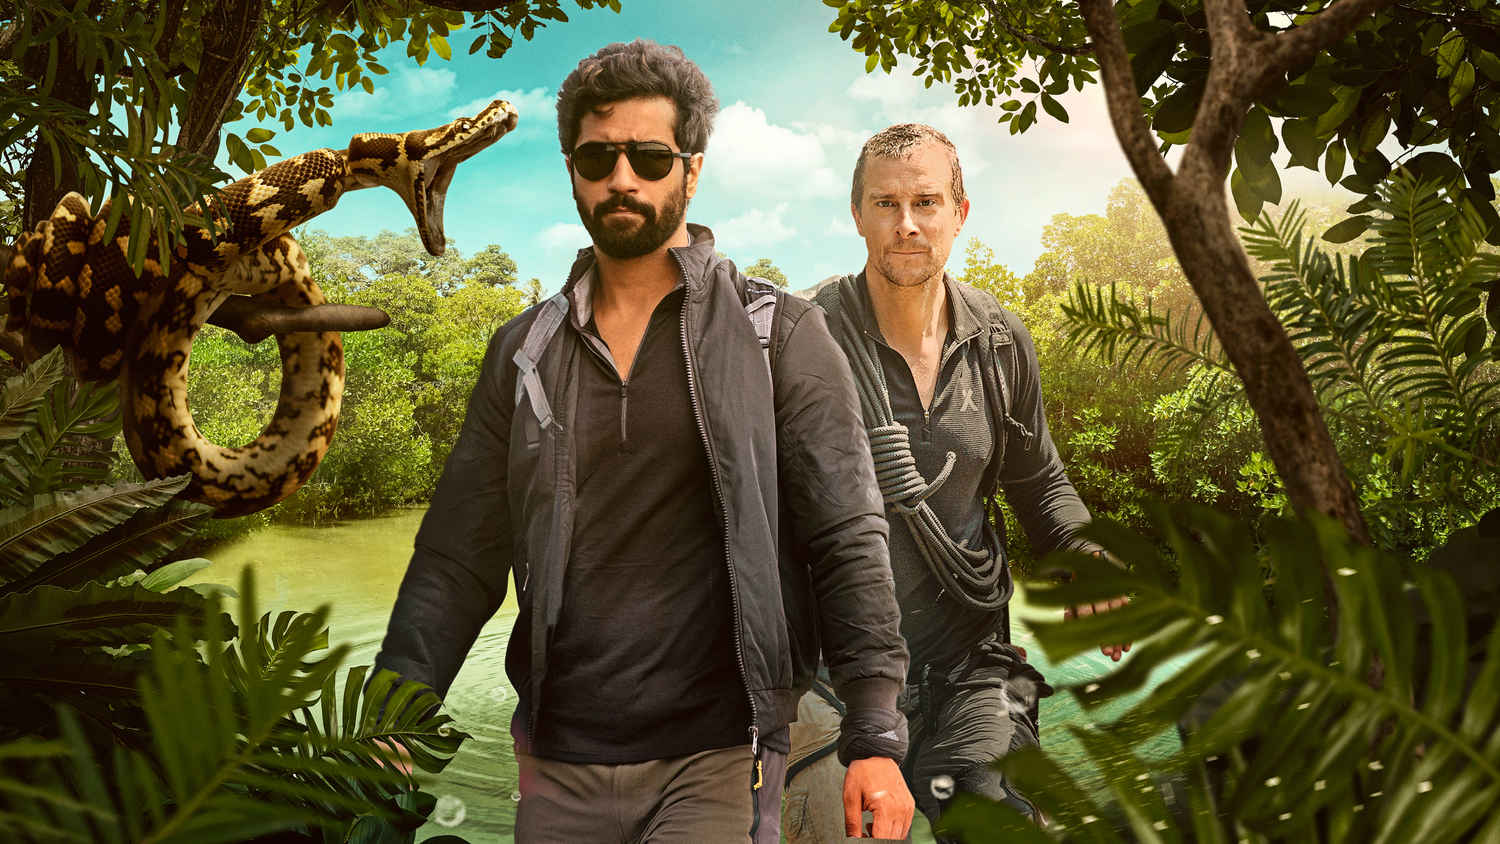 Into The Wild With Bear Grylls & Vicky Kaushal